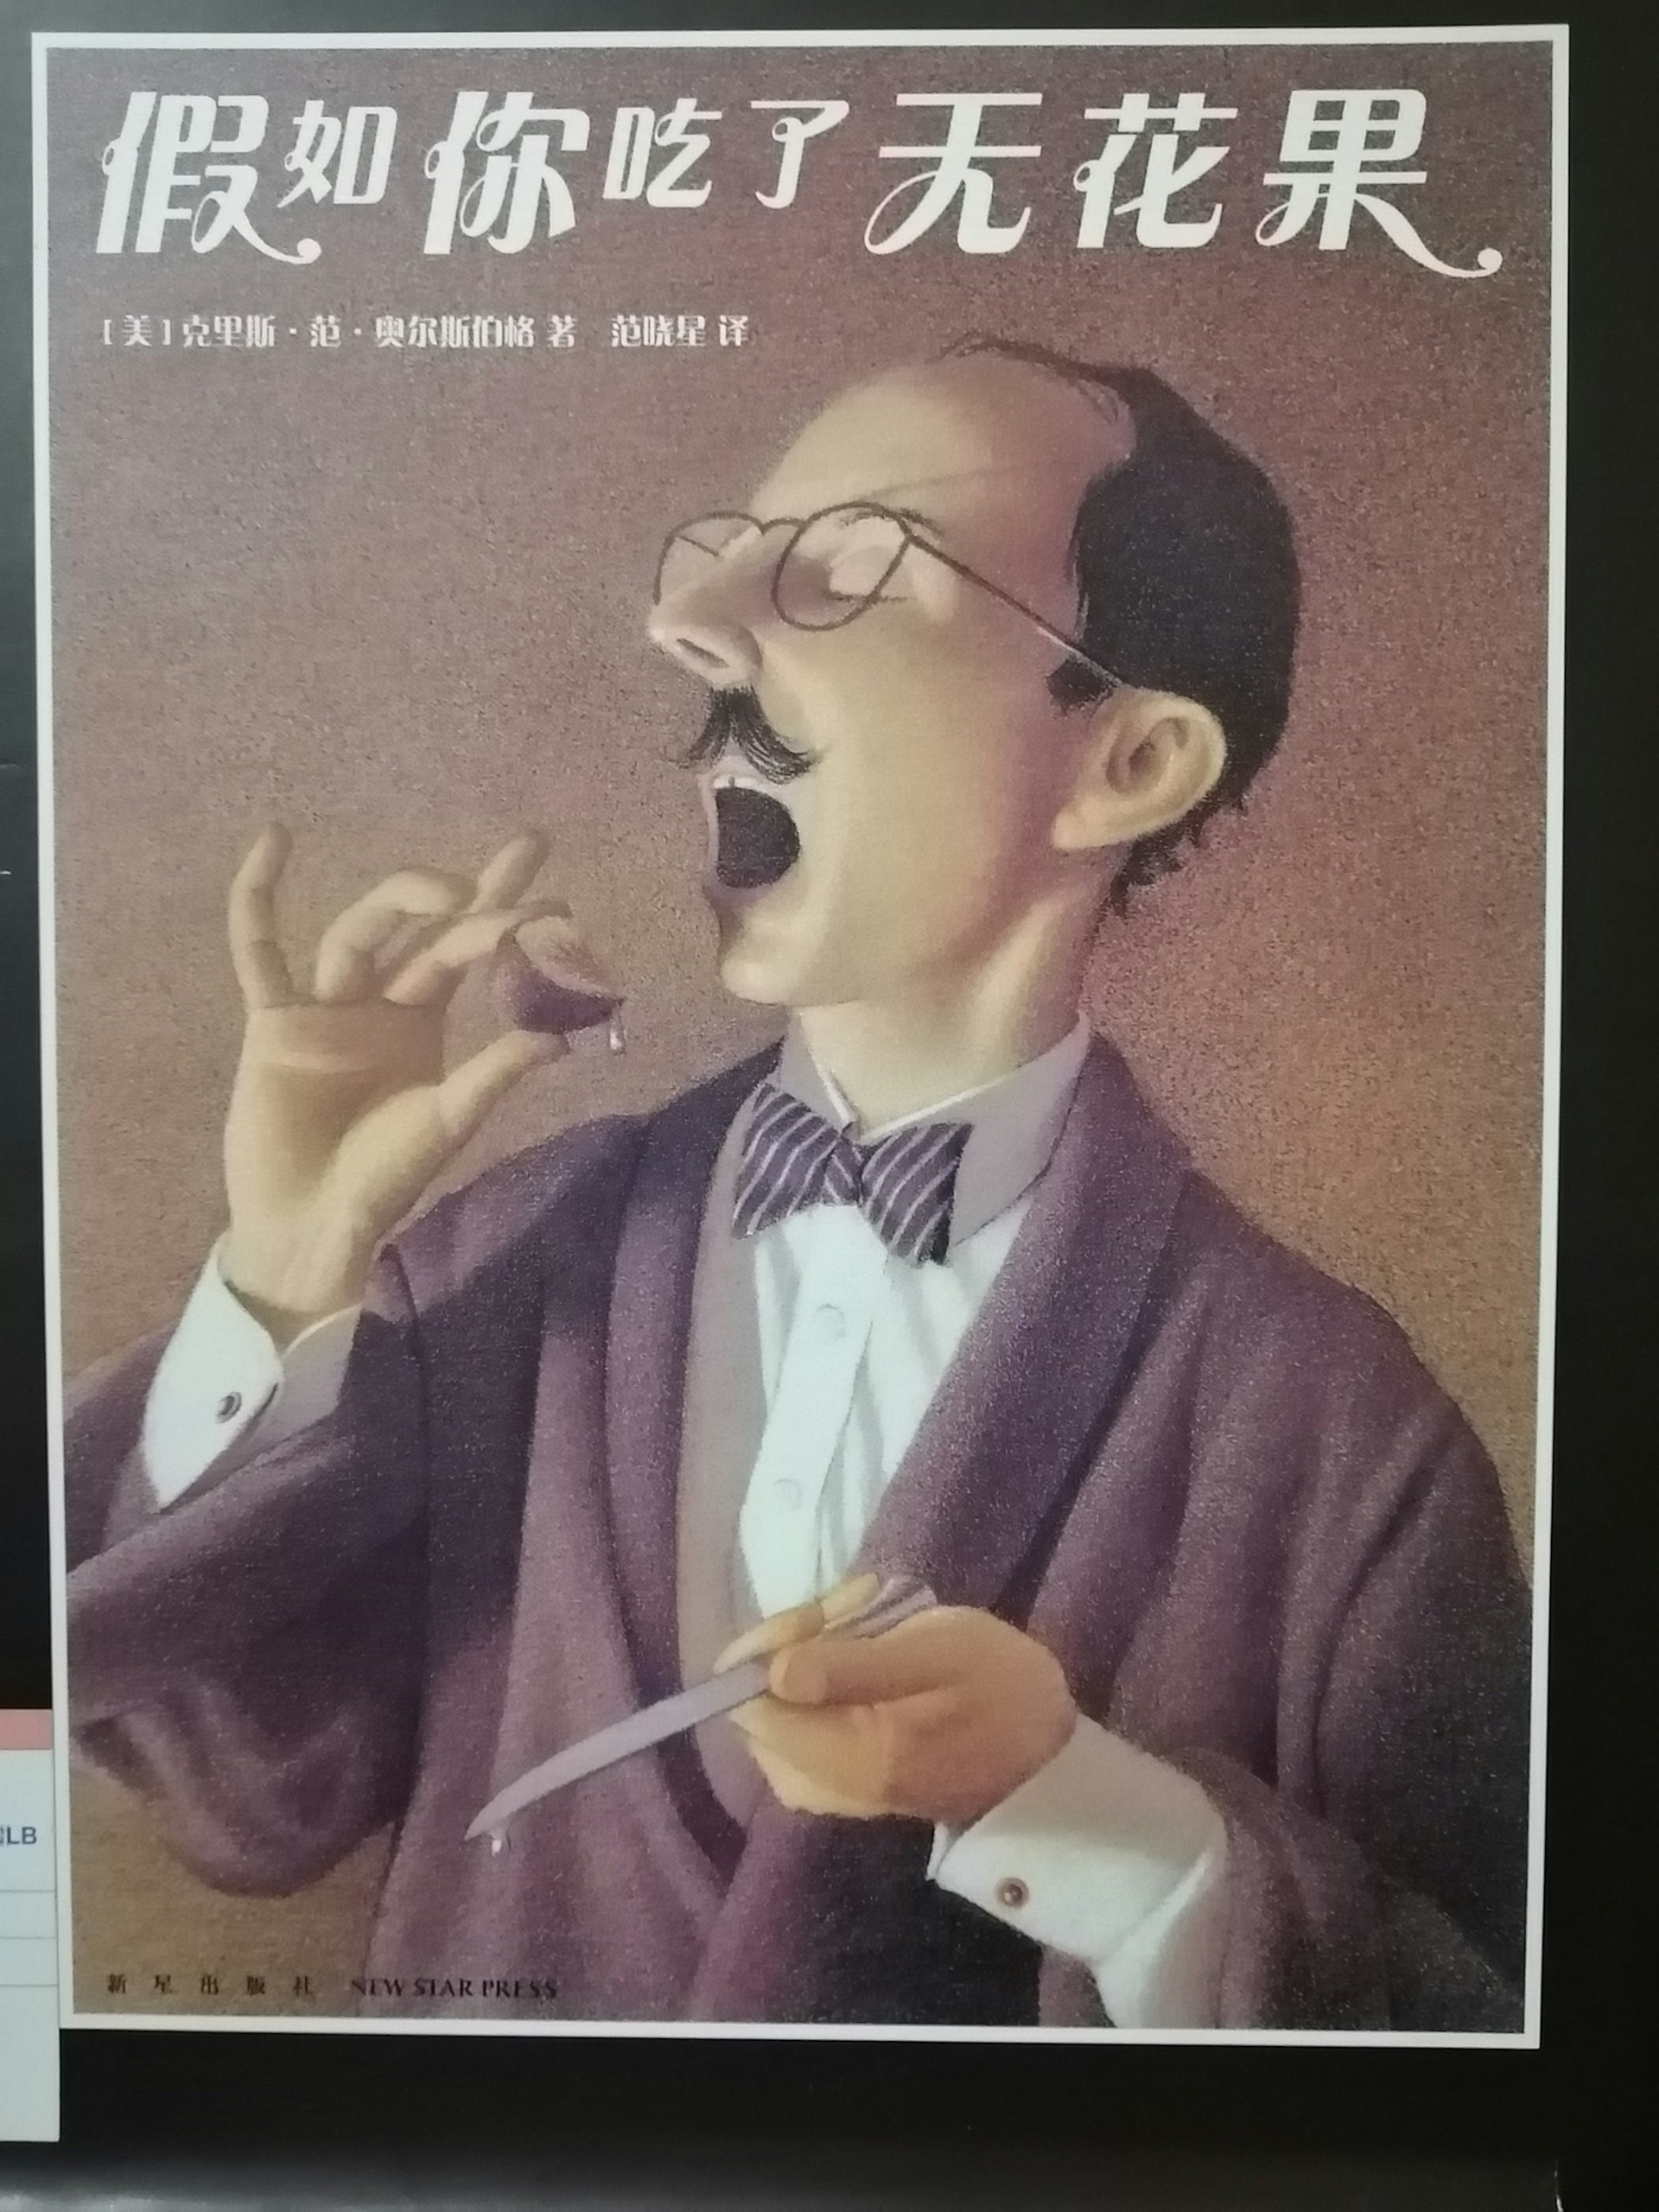 Photo of the original cover of the Mandarin version of the book